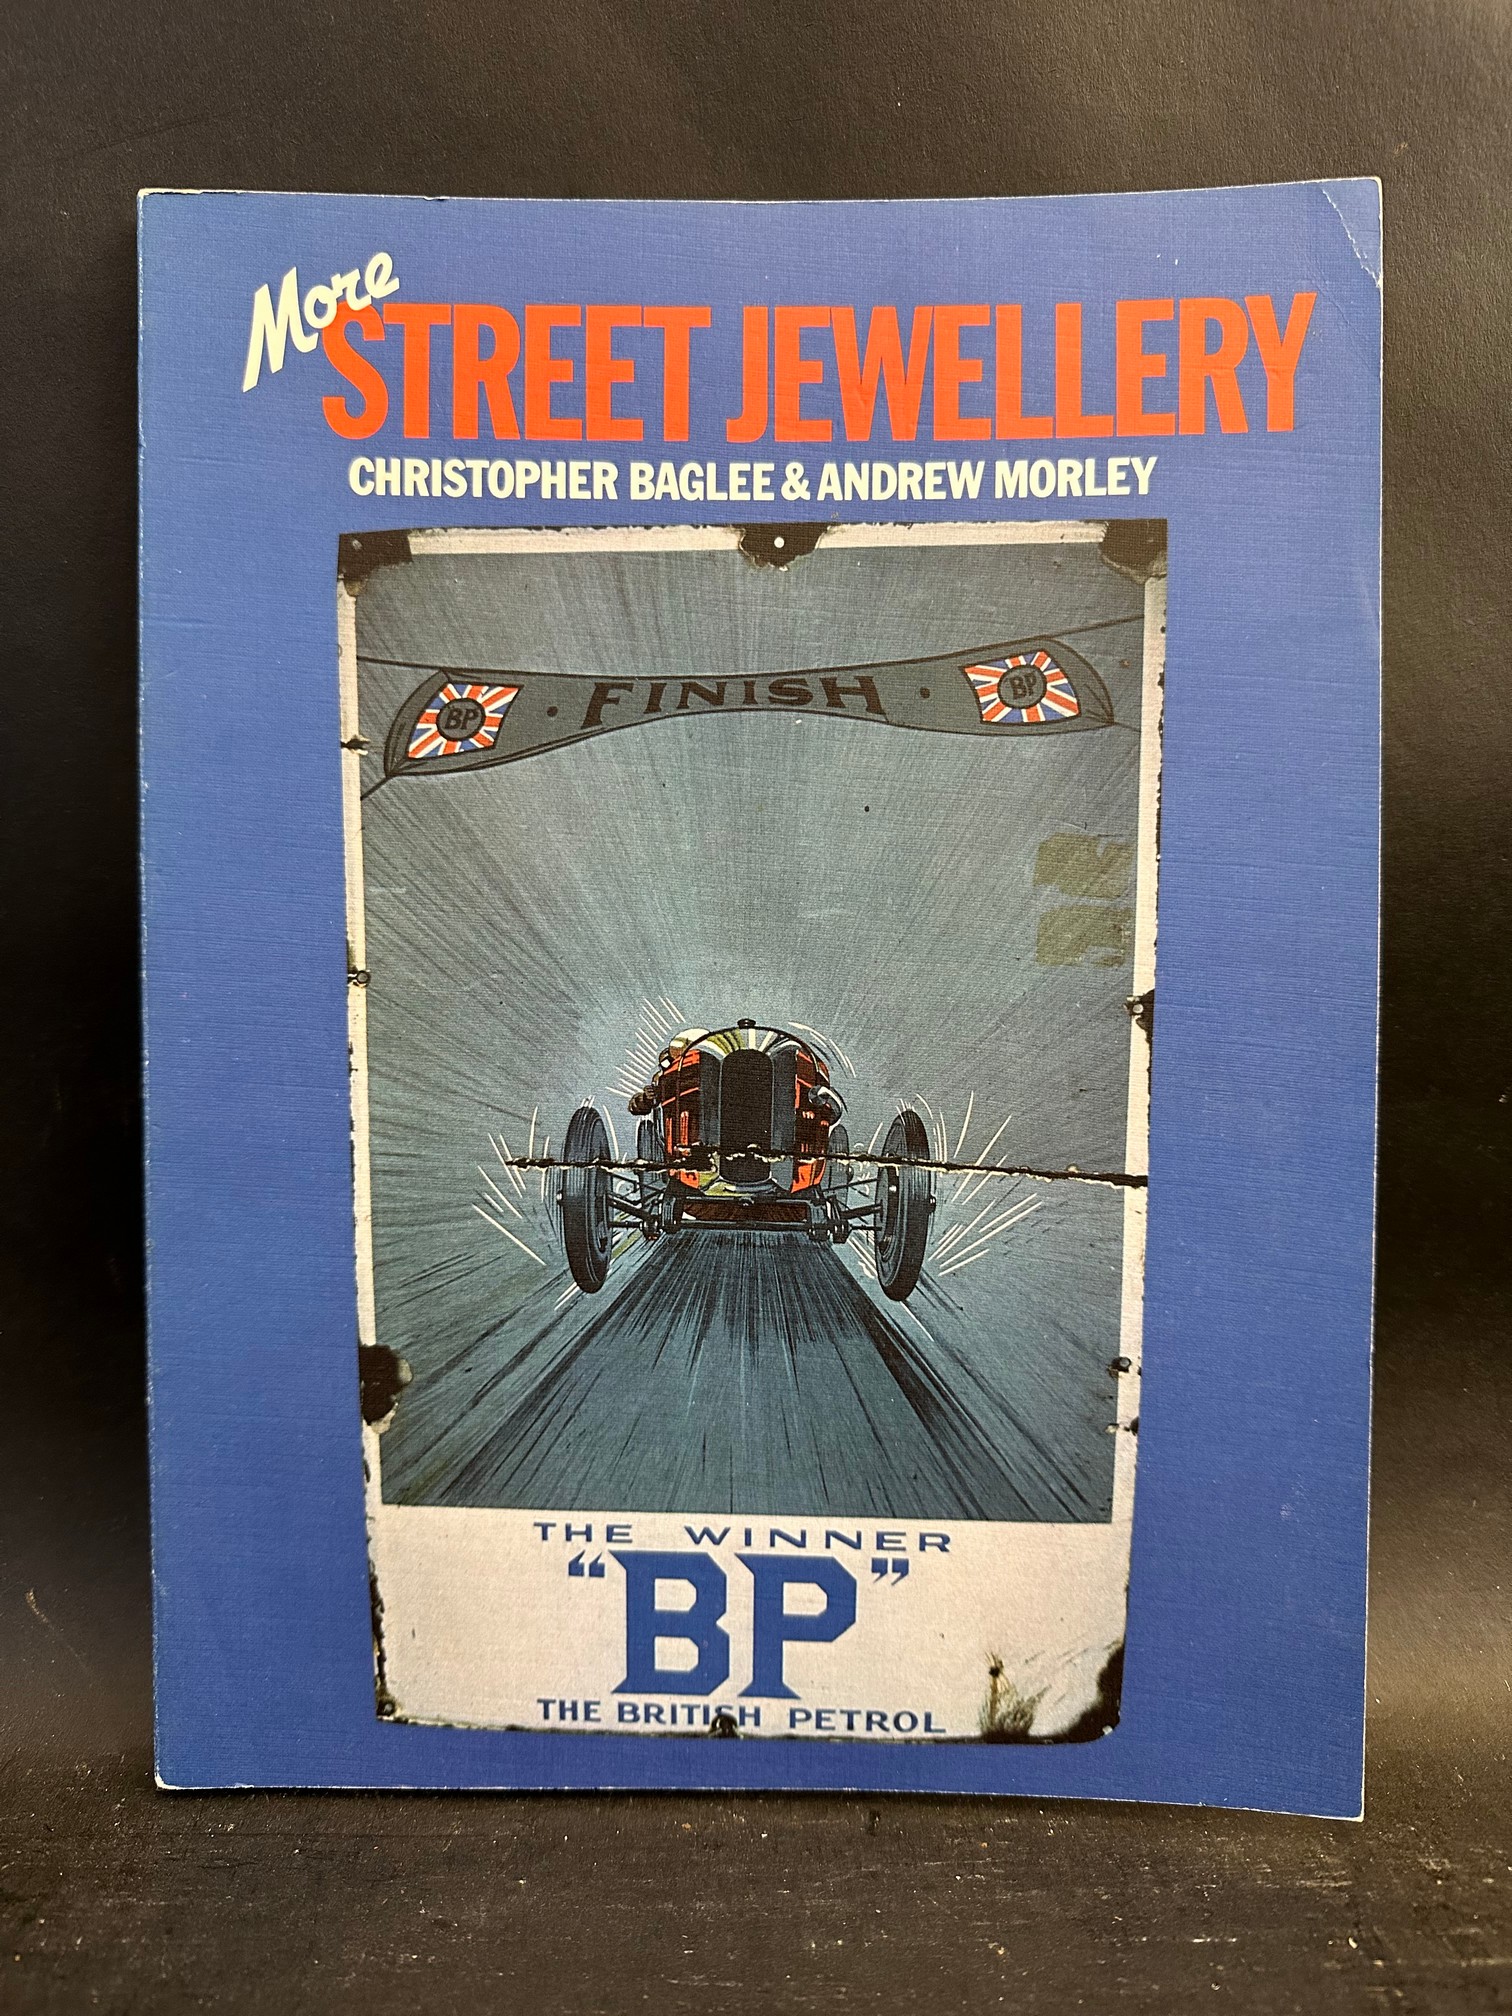 A copy of 'More Street Jewellery' by Christopher Baglee & Andrew Morley, published 1982.